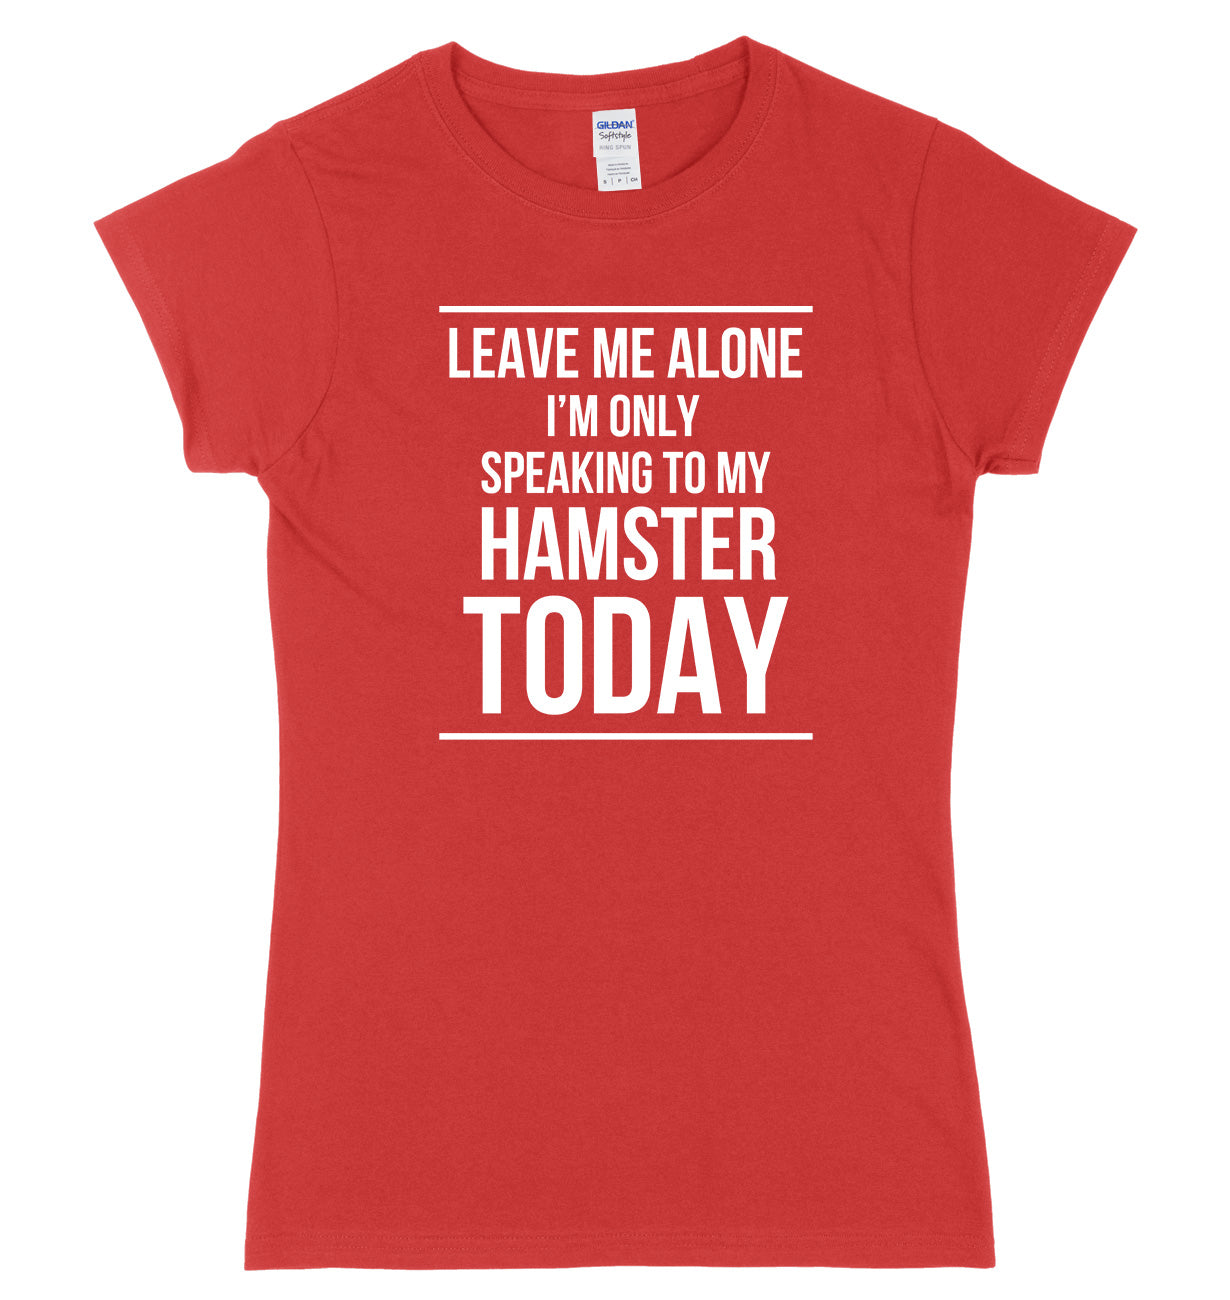 LEAVE ME ALONE I'M ONLY SPEAKING TO MY HAMSTER TODAY FUNNY WOMENS LADIES SLIM FIT  T-SHIRT